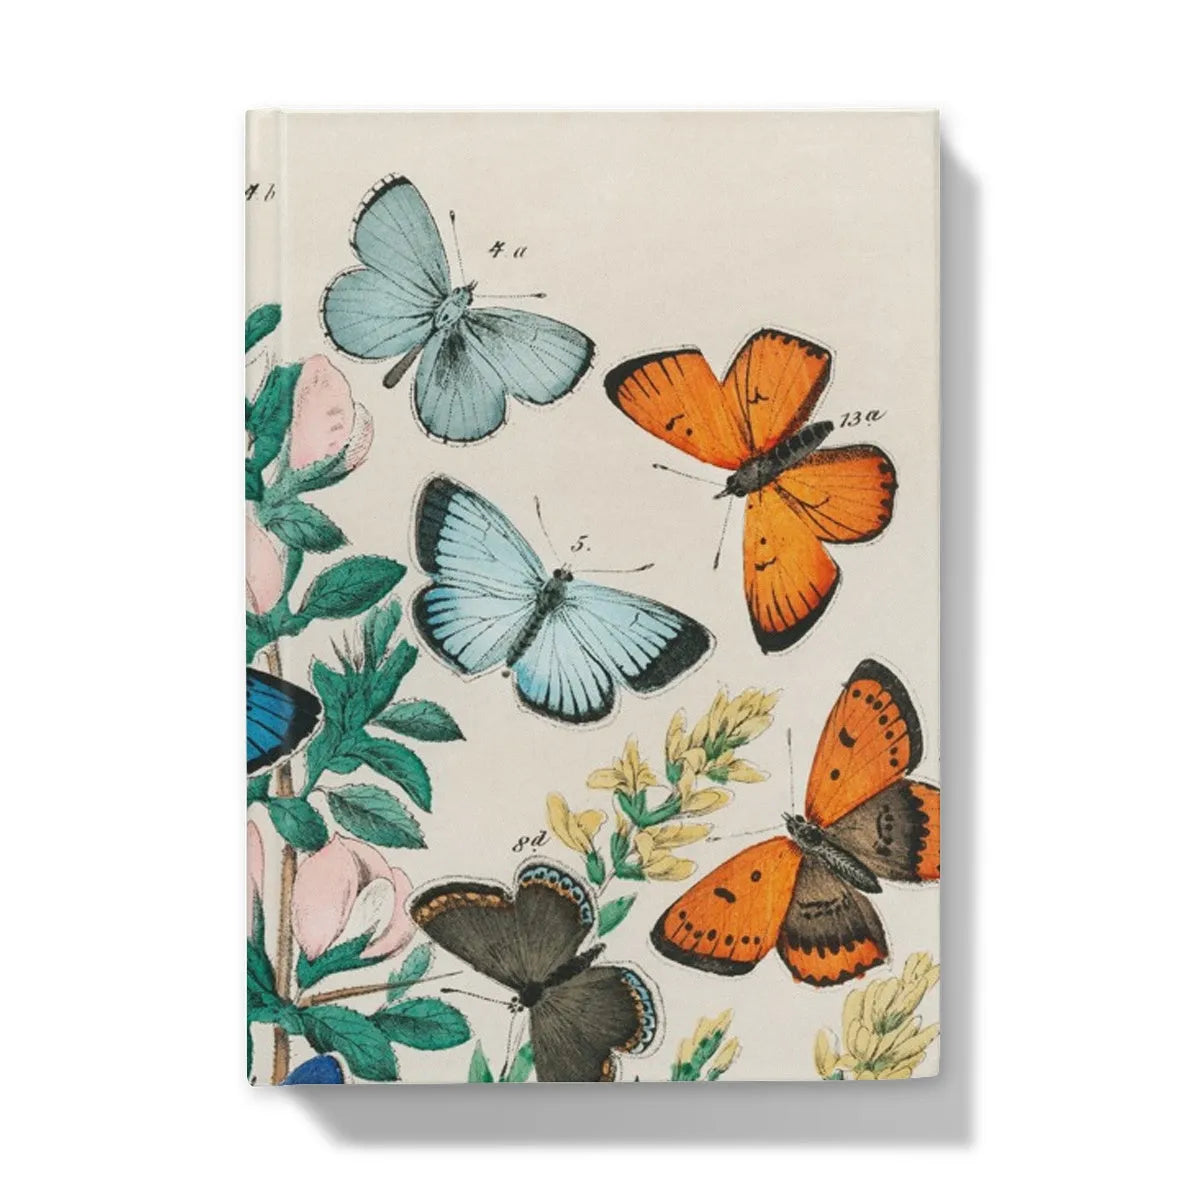 European Butterflies And Moths By William Forsell Kirby Hardback Journal - 5’x7’ / Lined - Notebooks & Notepads